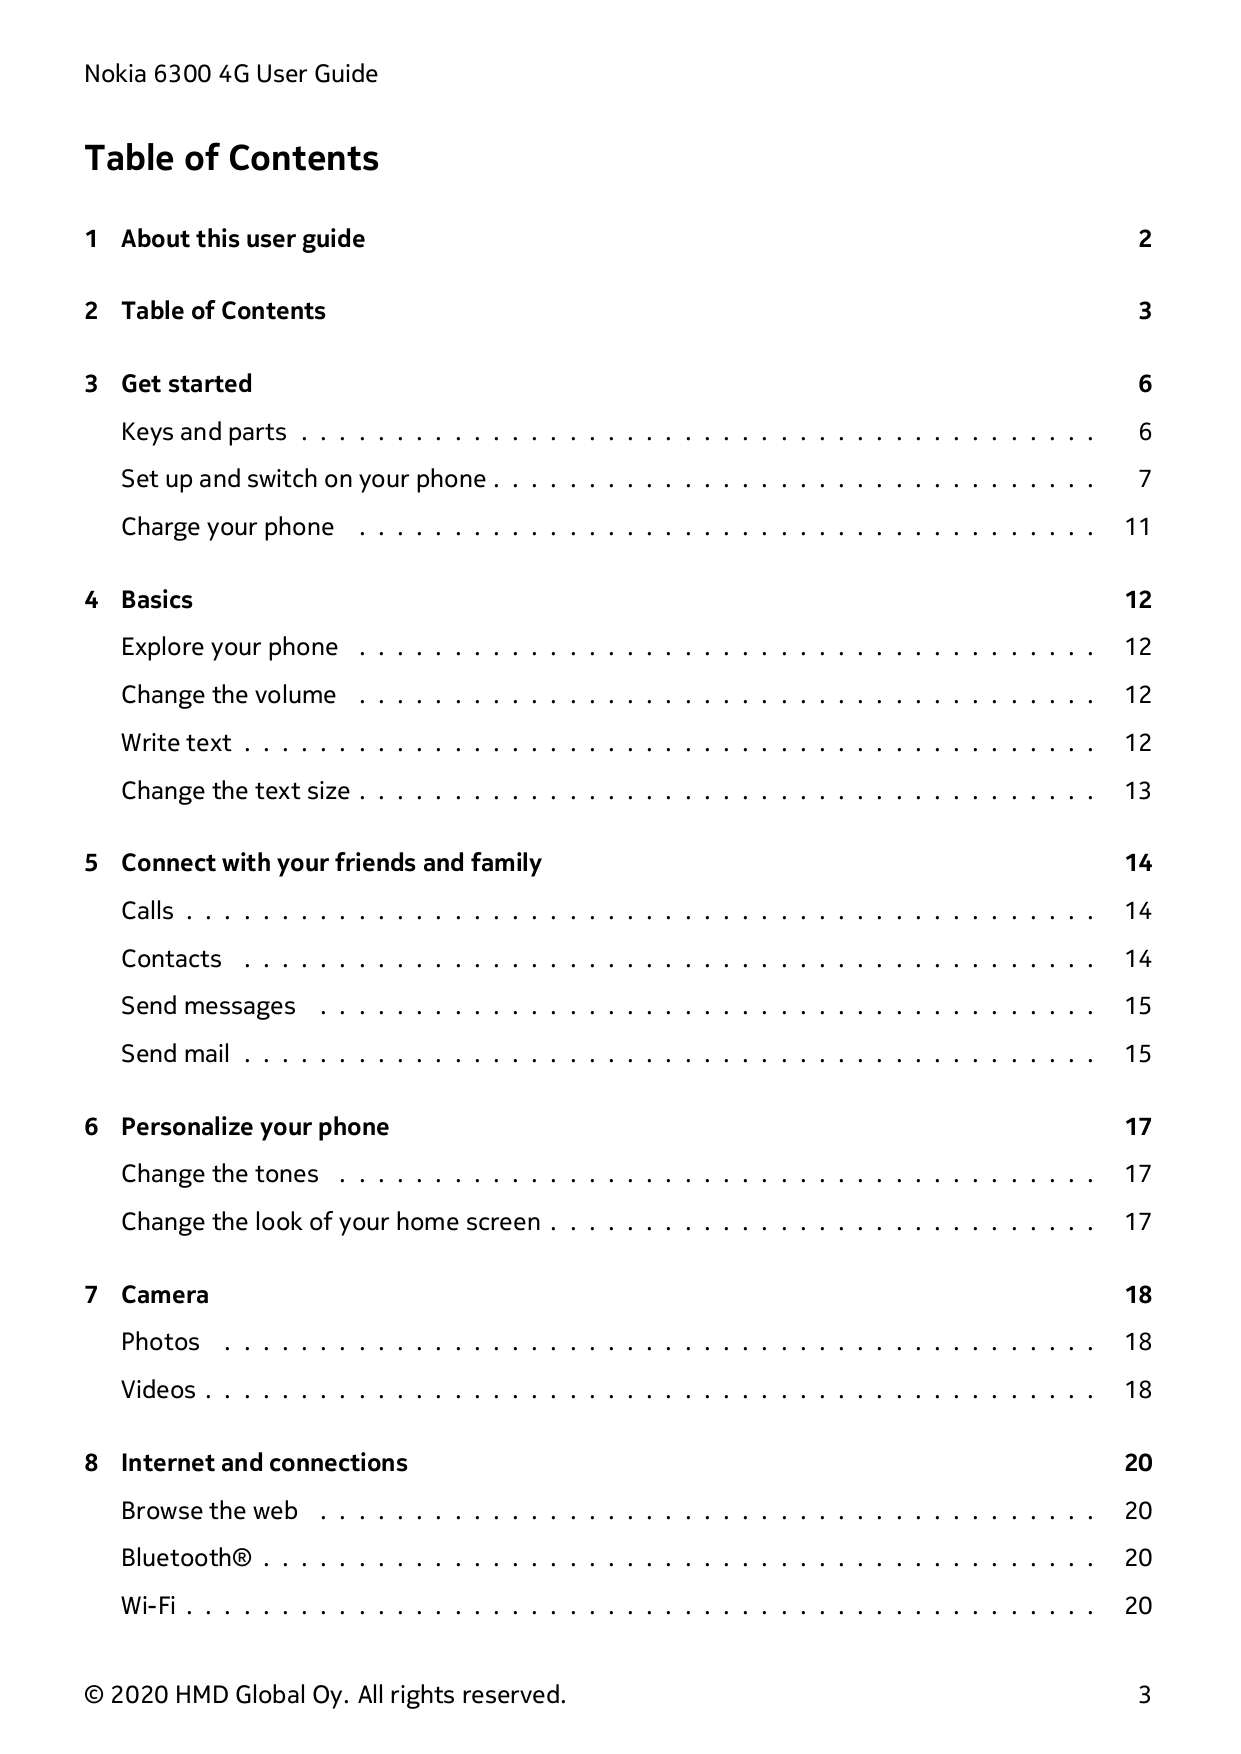 Nokia 6300 4G User GuideTable of Contents1 About this user guide22 Table of Contents33 Get started6Keys and parts . . . . . . . 